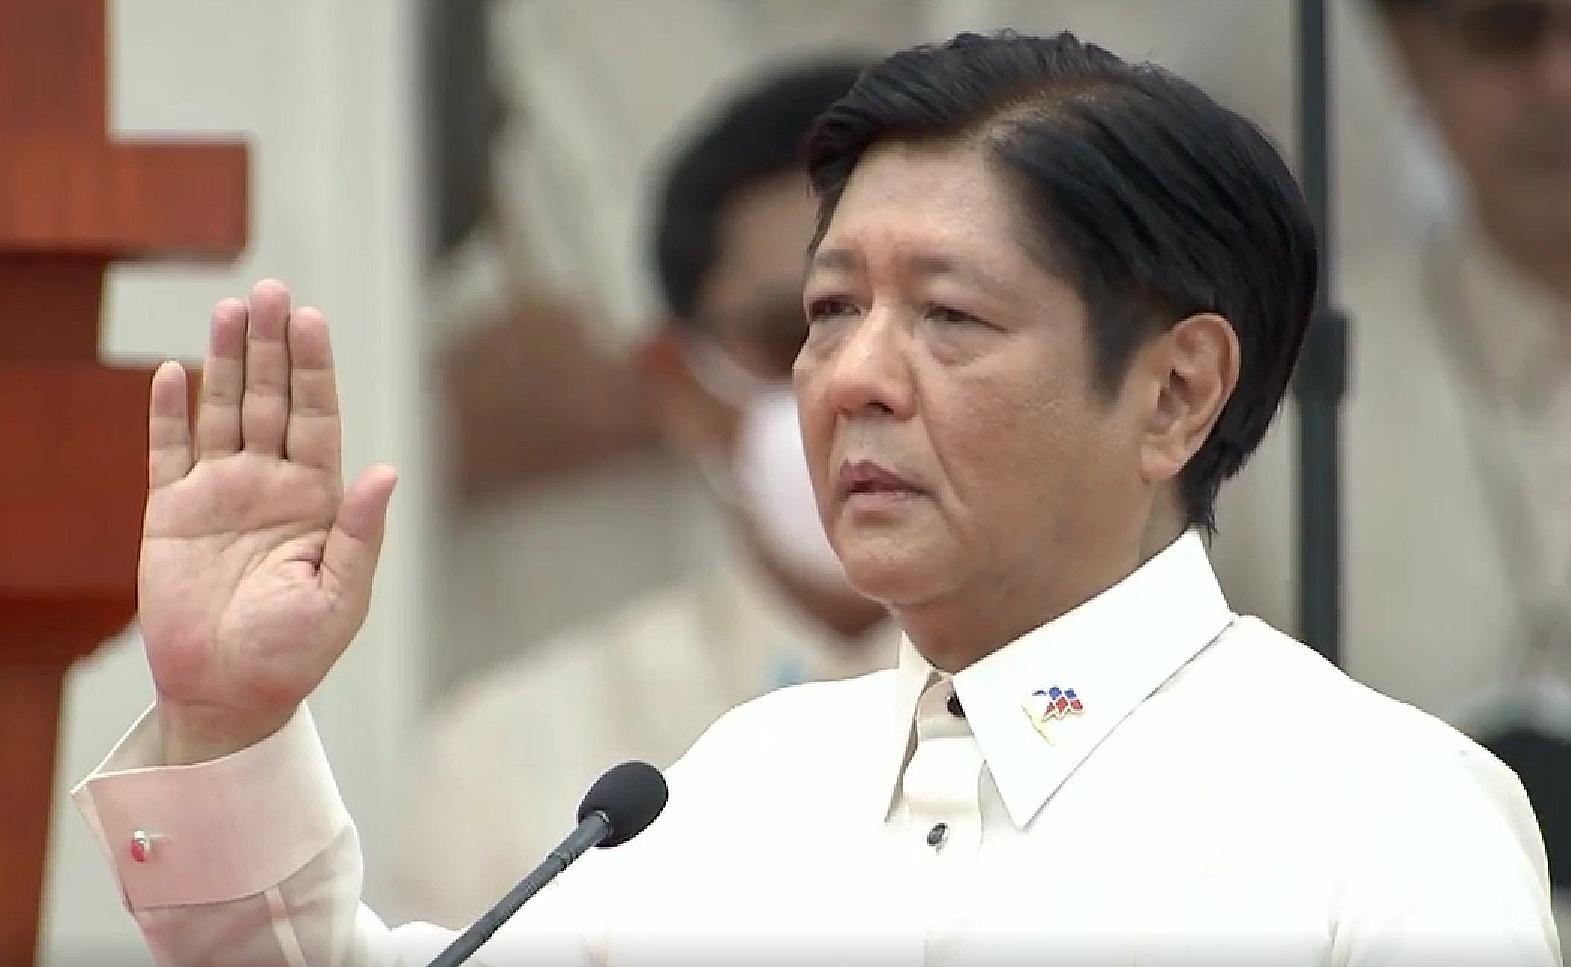 Pres. Ferdinand Marcos infra projectsJr. during his oathtaking at the National Museum. Image from PCOO / Facebook